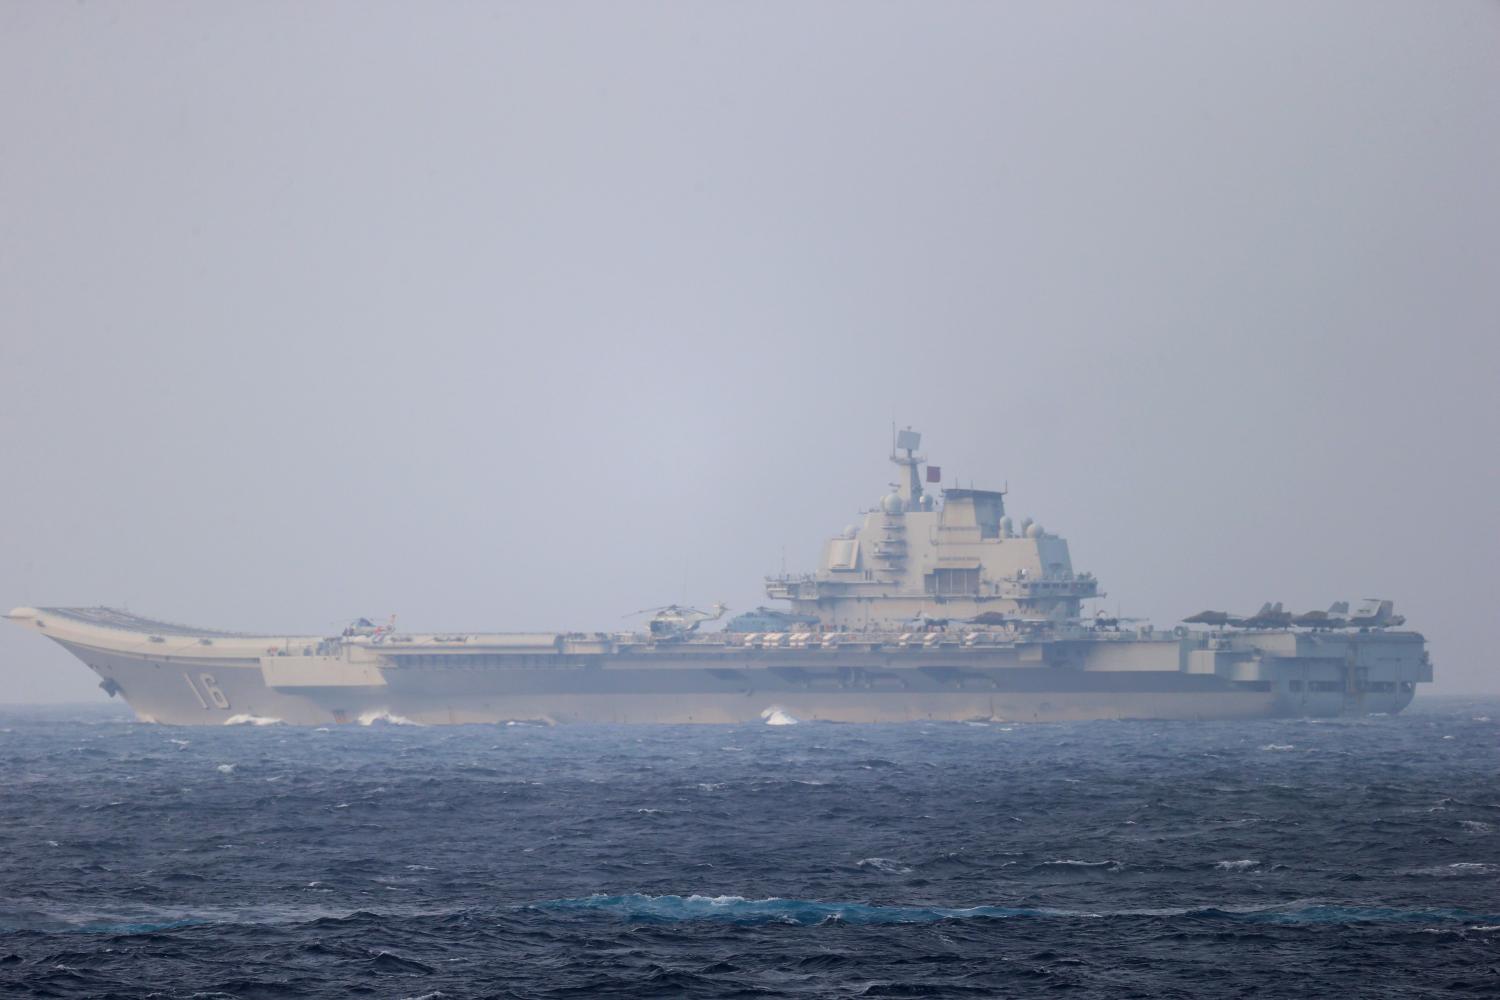 FILE PHOTO: Chinese aircraft carrier Liaoning sails through the Miyako Strait near Okinawa on its way to the Pacific in this handout photo taken by Japan Self-Defense Forces and released by the Joint Staff Office of the Defense Ministry of Japan on April 4, 2021. Joint Staff Office of the Defense Ministry of Japan/HANDOUT via REUTERS ATTENTION EDITORS - THIS IMAGE WAS PROVIDED BY A THIRD PARTY. MANDATORY CREDIT. THIS PICTURE WAS PROCESSED BY REUTERS TO ENHANCE QUALITY. AN UNPROCESSED VERSION HAS BEEN PROVIDED SEPARATELY/File Photo